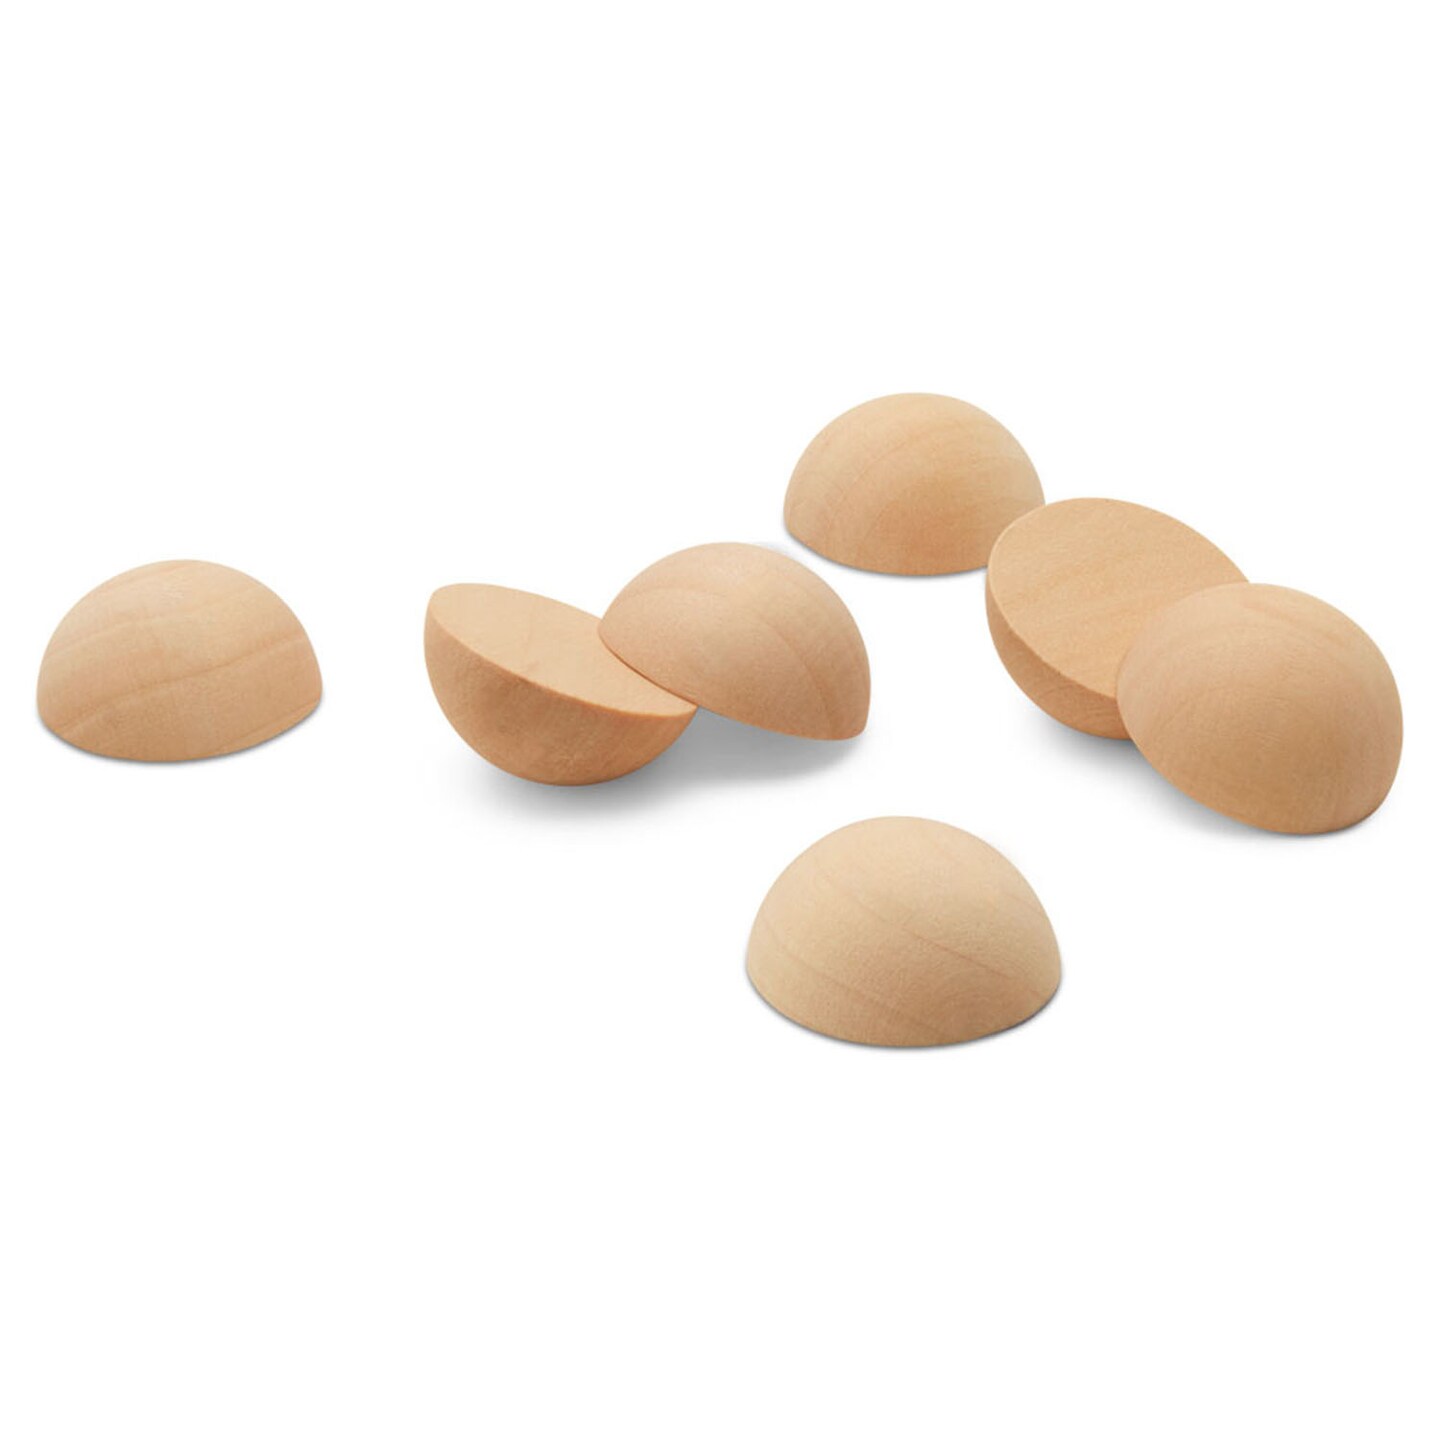 Wooden Split Balls, Multiple Sizes Available, Half Balls for Crafting and DIY D&#xE9;cor |Woodpeckers